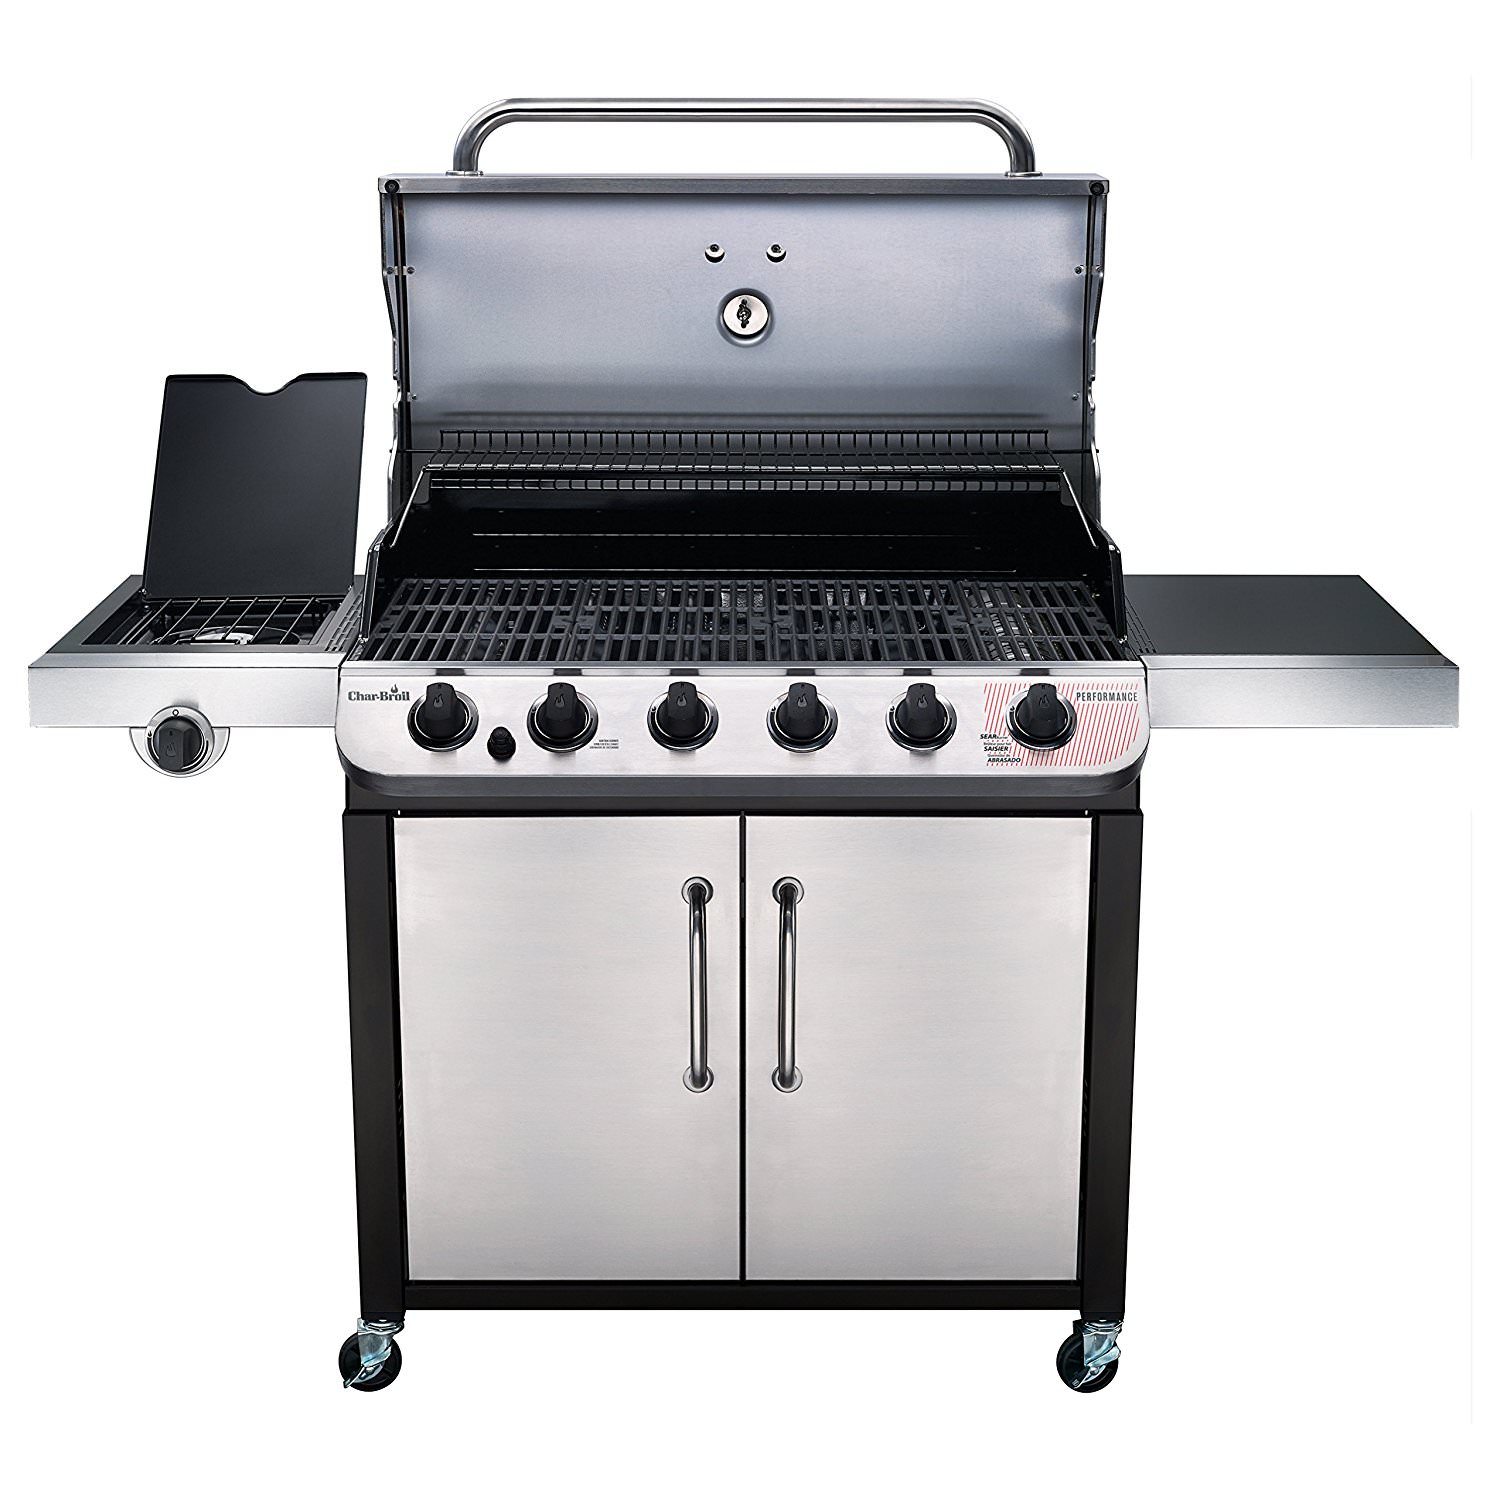 Char-Broil Performance Series 6-burner Liquid Propane Gas Grill with Side Burner, Black & Stainless - image 3 of 11